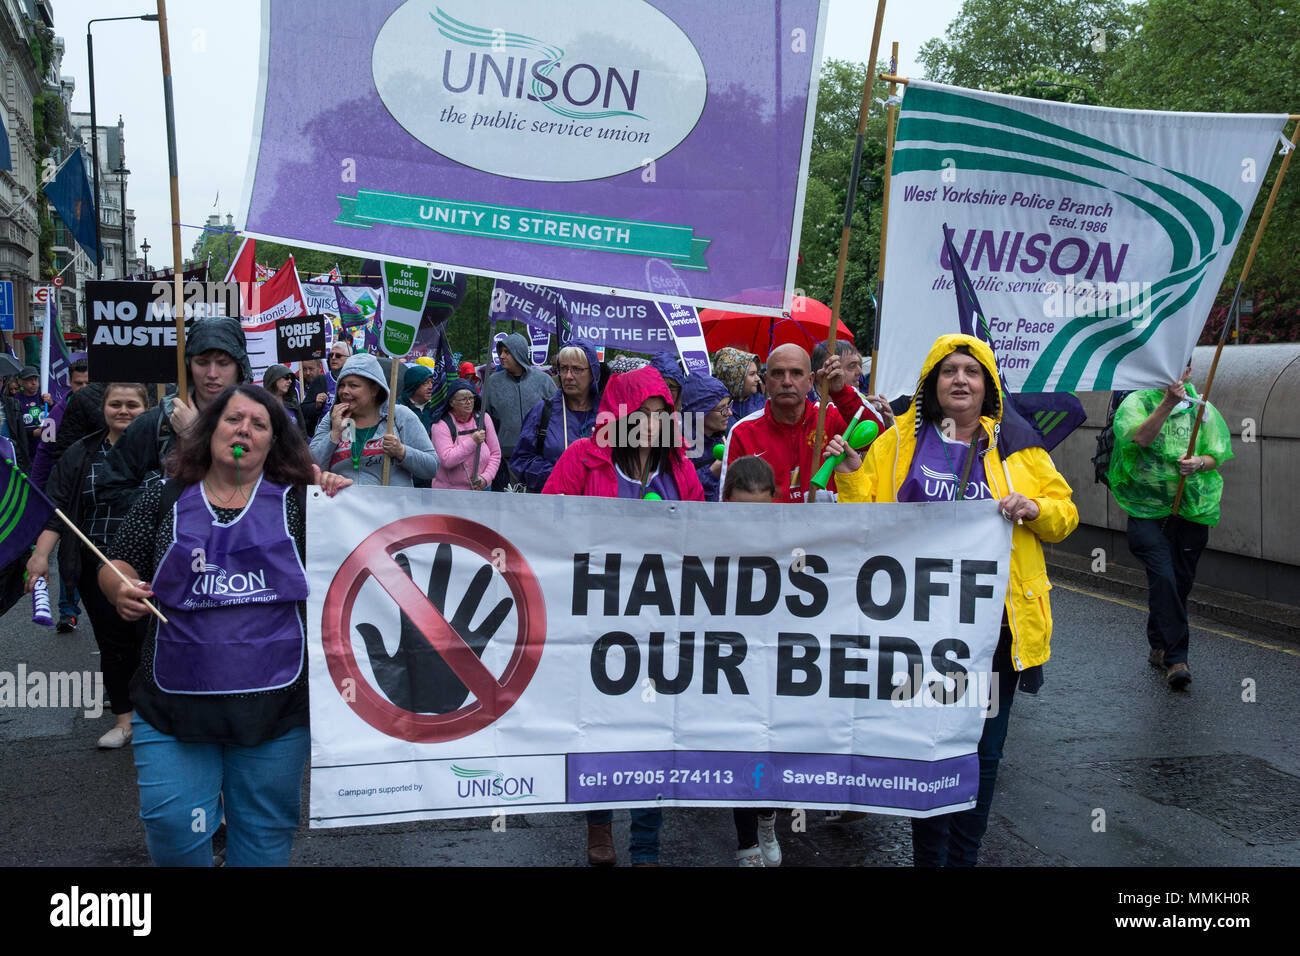 London, UK. 12th May, 2018. TUC March and Rally. Thousands march through London to demand 'A New Deal for Working People' in this demonstration organised by the Trades Union Congress. Marchers formed up at Victoria Embankment and marched to their rally in Hyde Park.  Credit: Stephen Bell/Alamy Live News Stock Photo